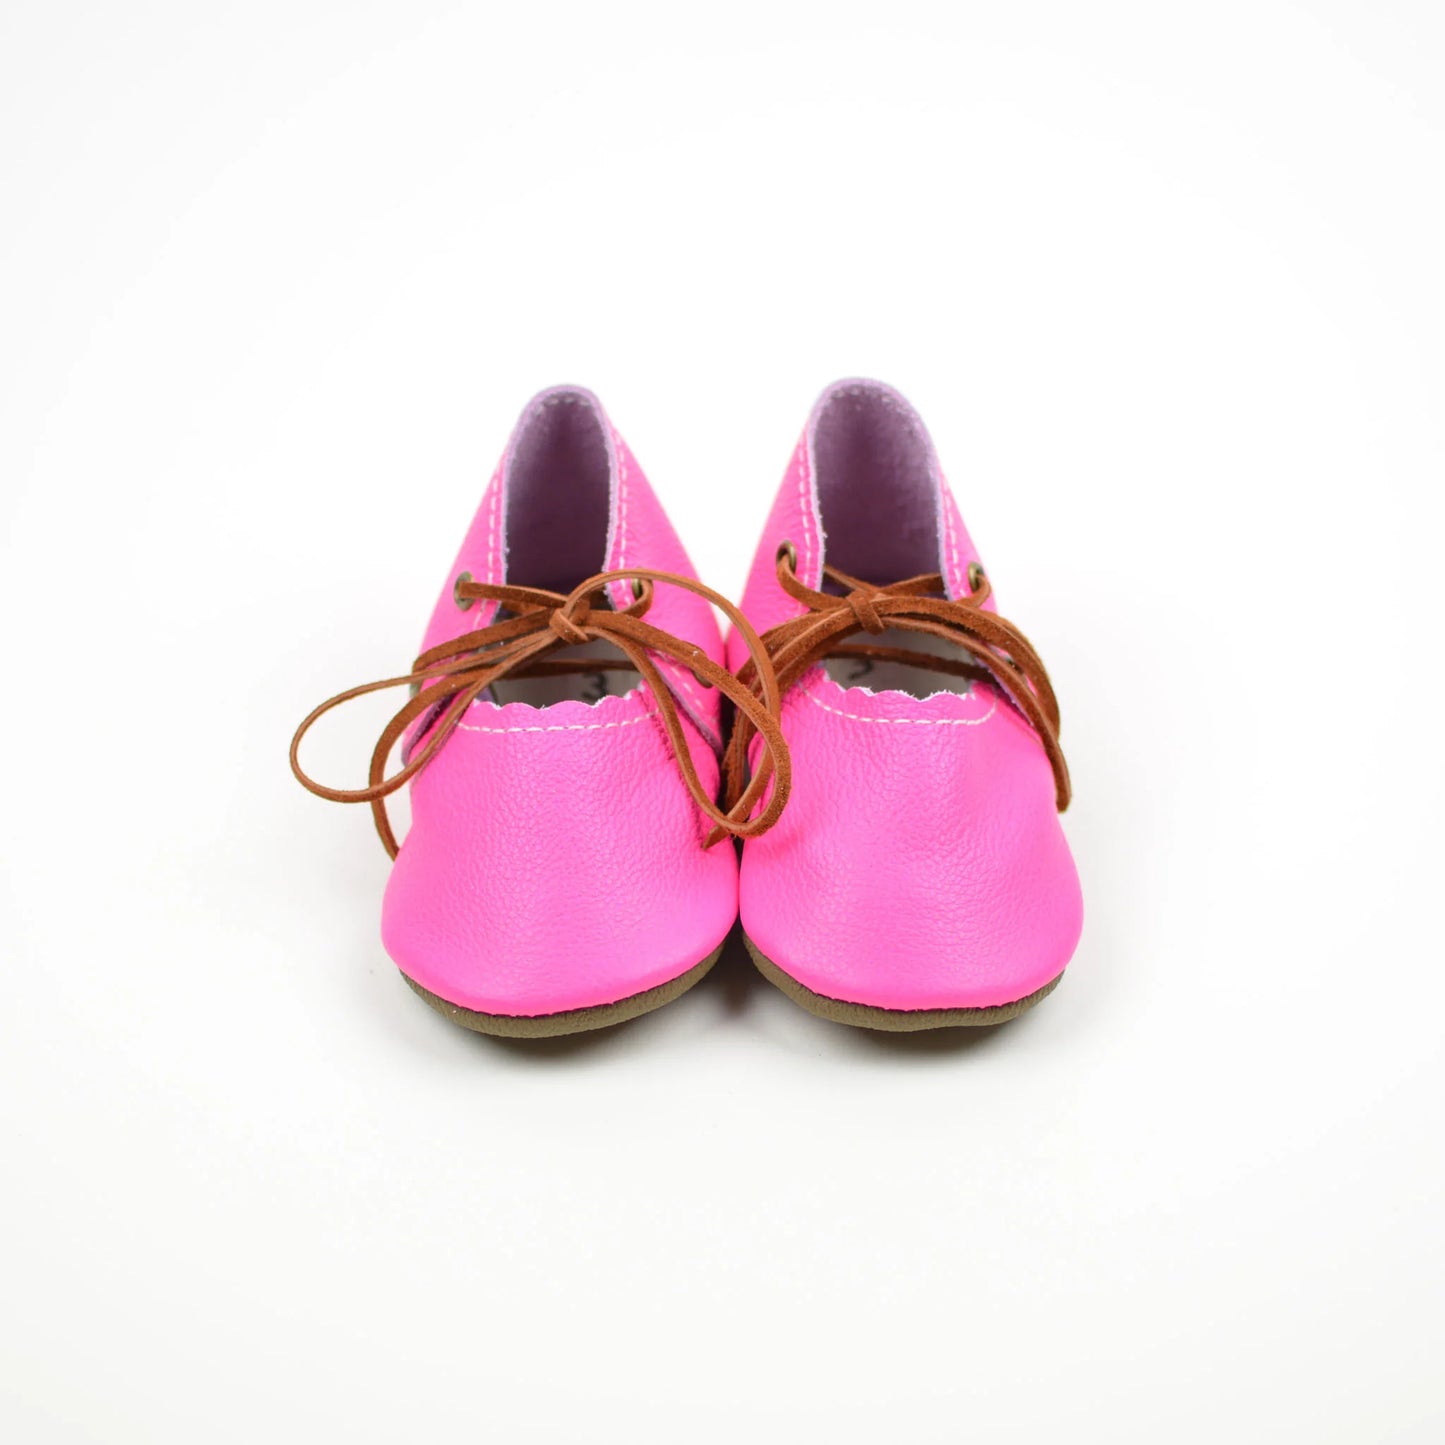 RTS Fiesta Neon Pink Lace Mary Janes - Size 3 (12-18M) (5")